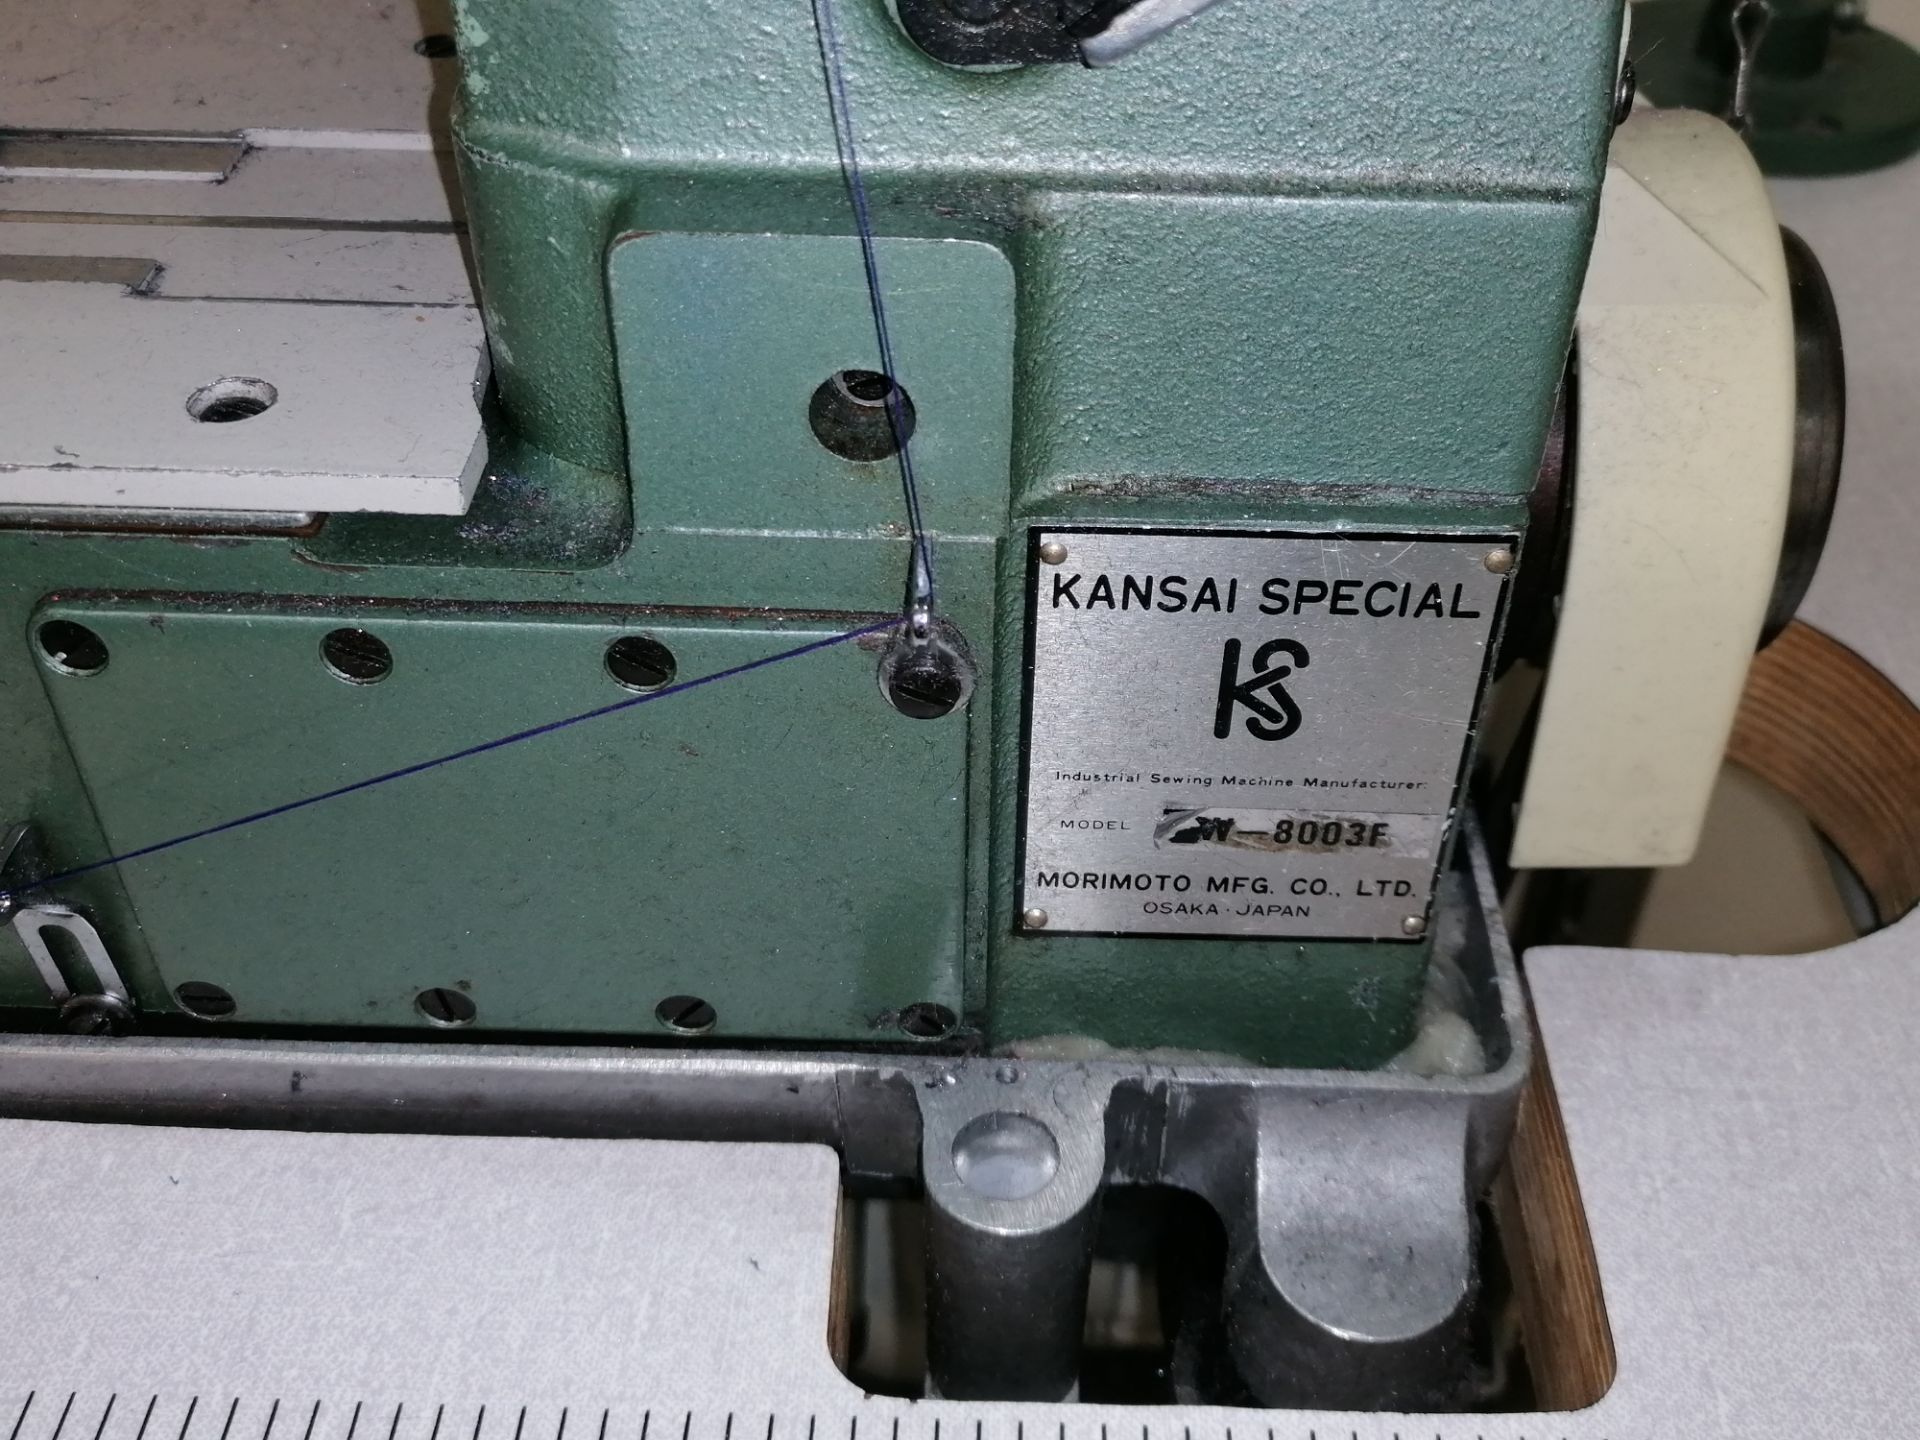 Kansai Special W-8003F Needle cover stitch industrial sewing machine Serial No KS052239 - Image 5 of 5